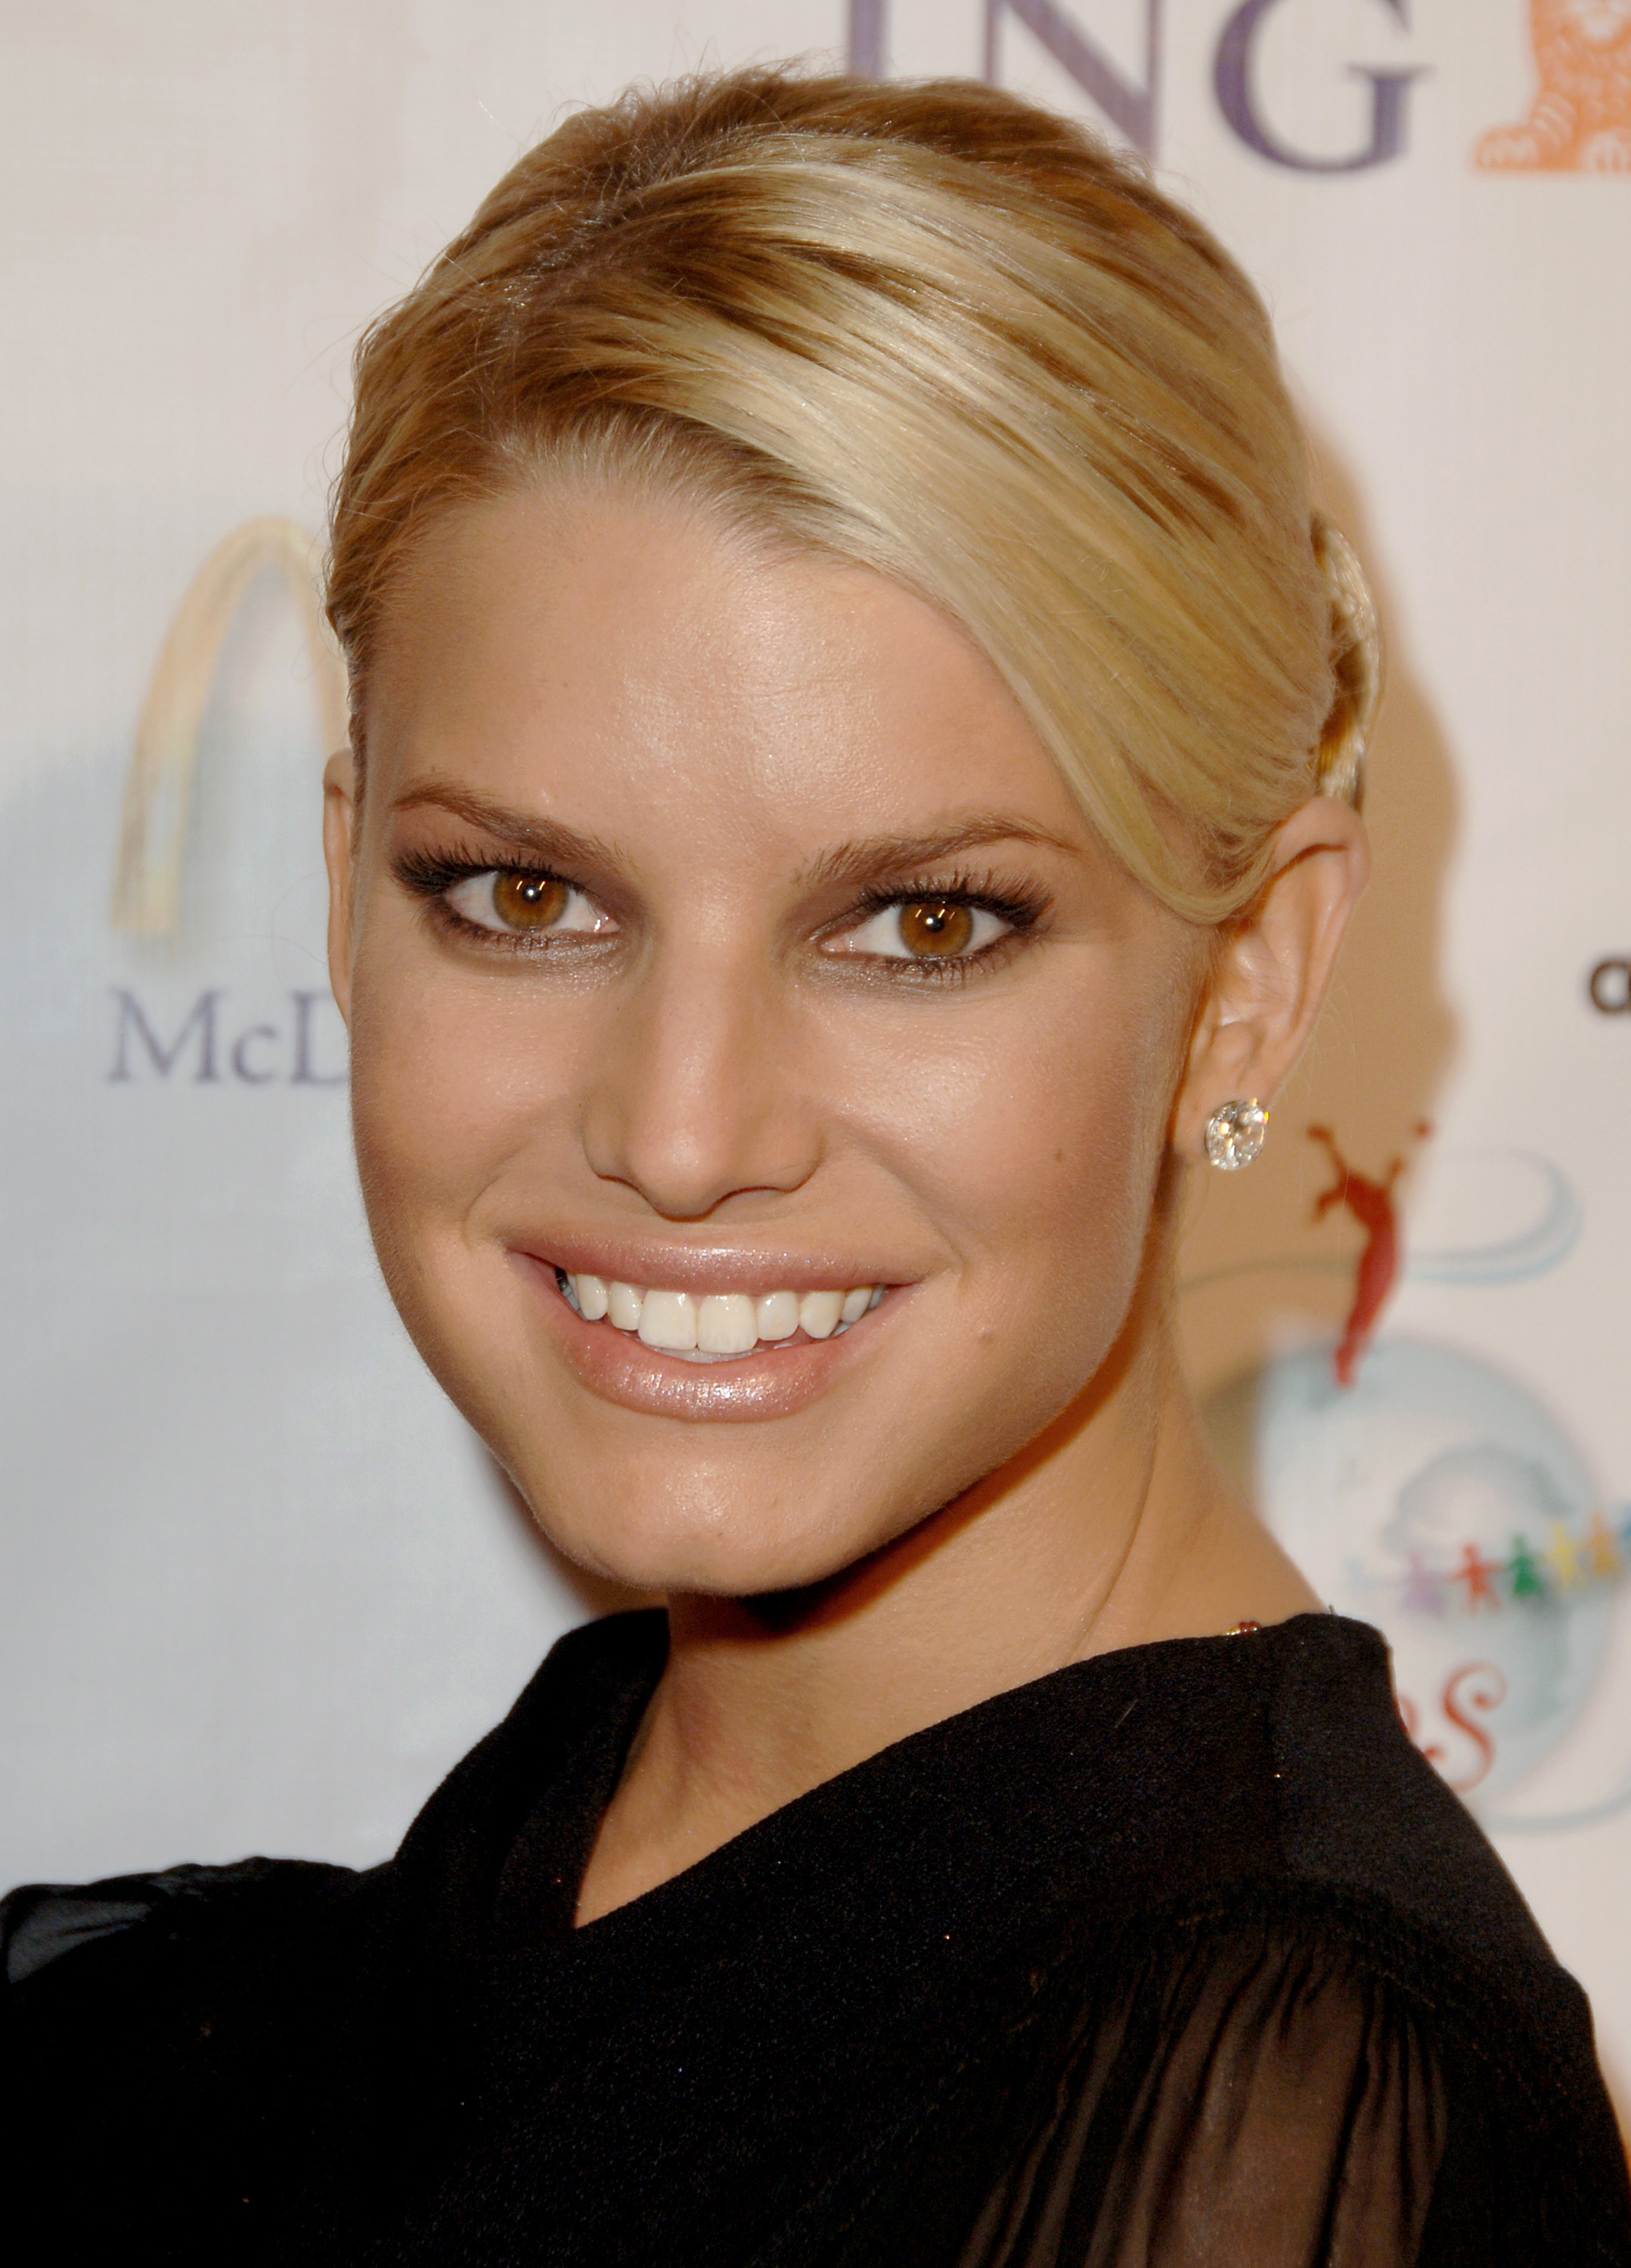 Jessica Simpson at a Childrens Hospital in Los Angeles in 2006 | Source: Getty Images